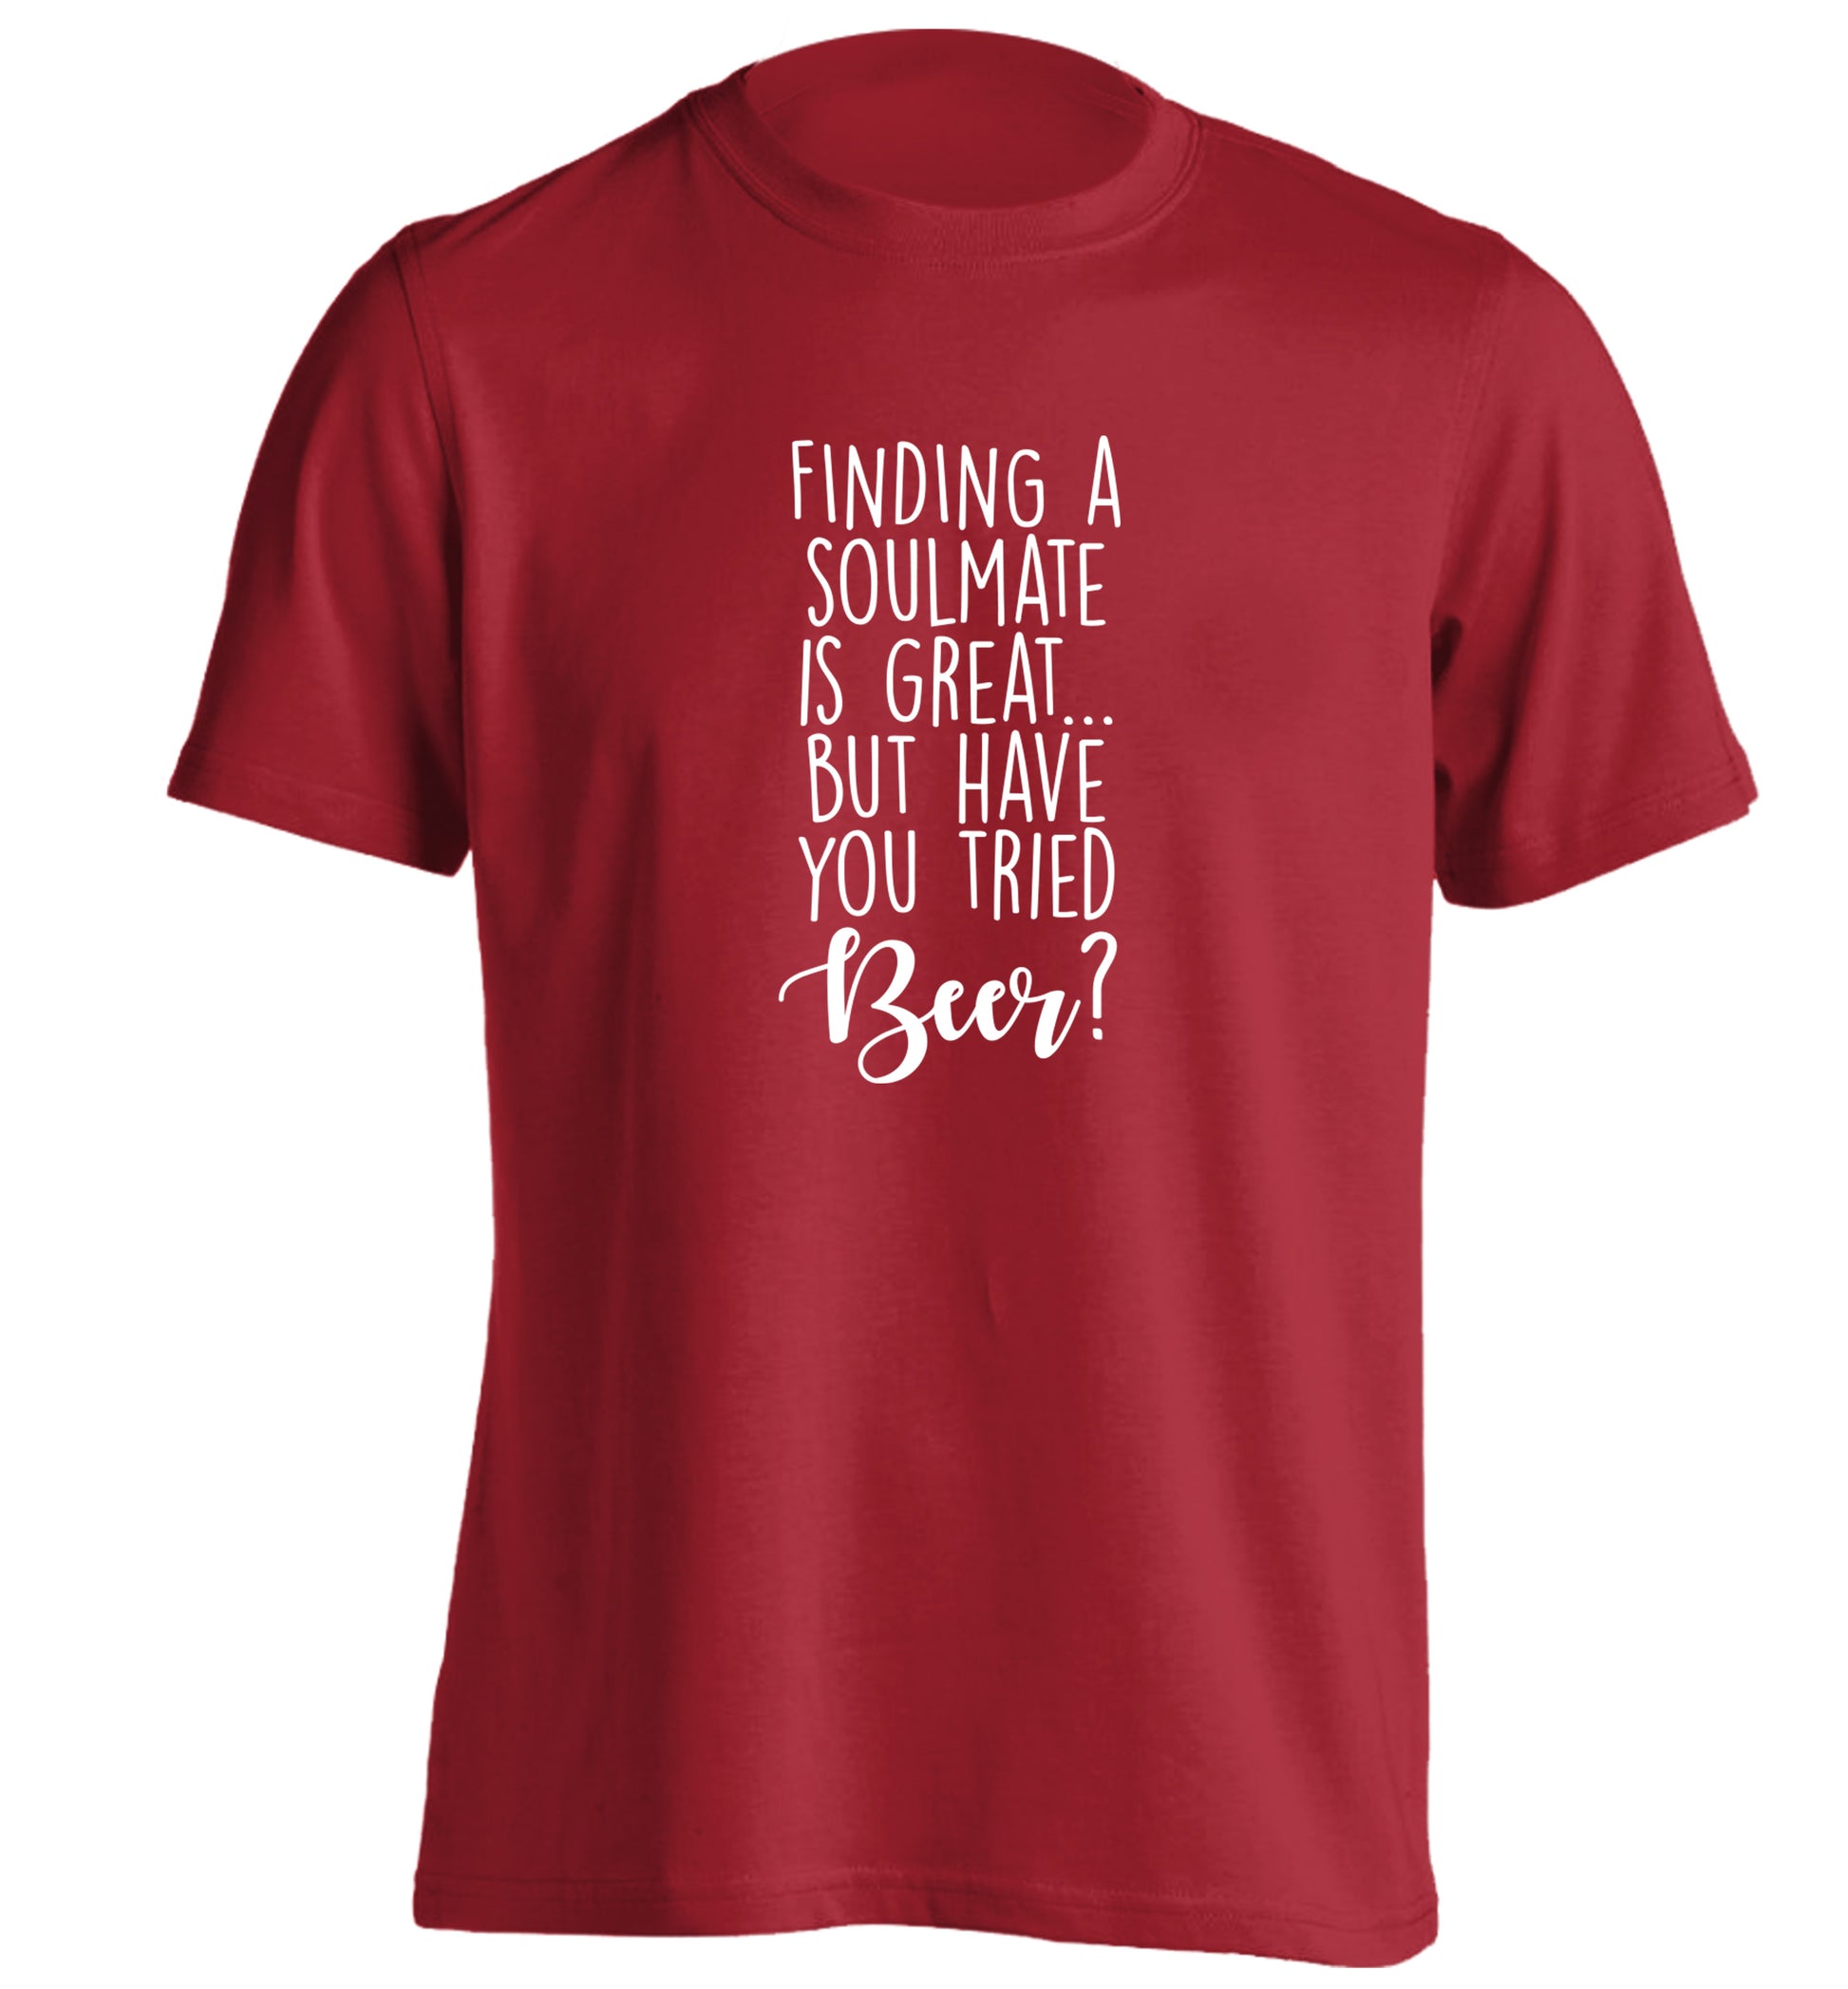 Finding a soulmate is great but have you tried beer? adults unisex red Tshirt 2XL